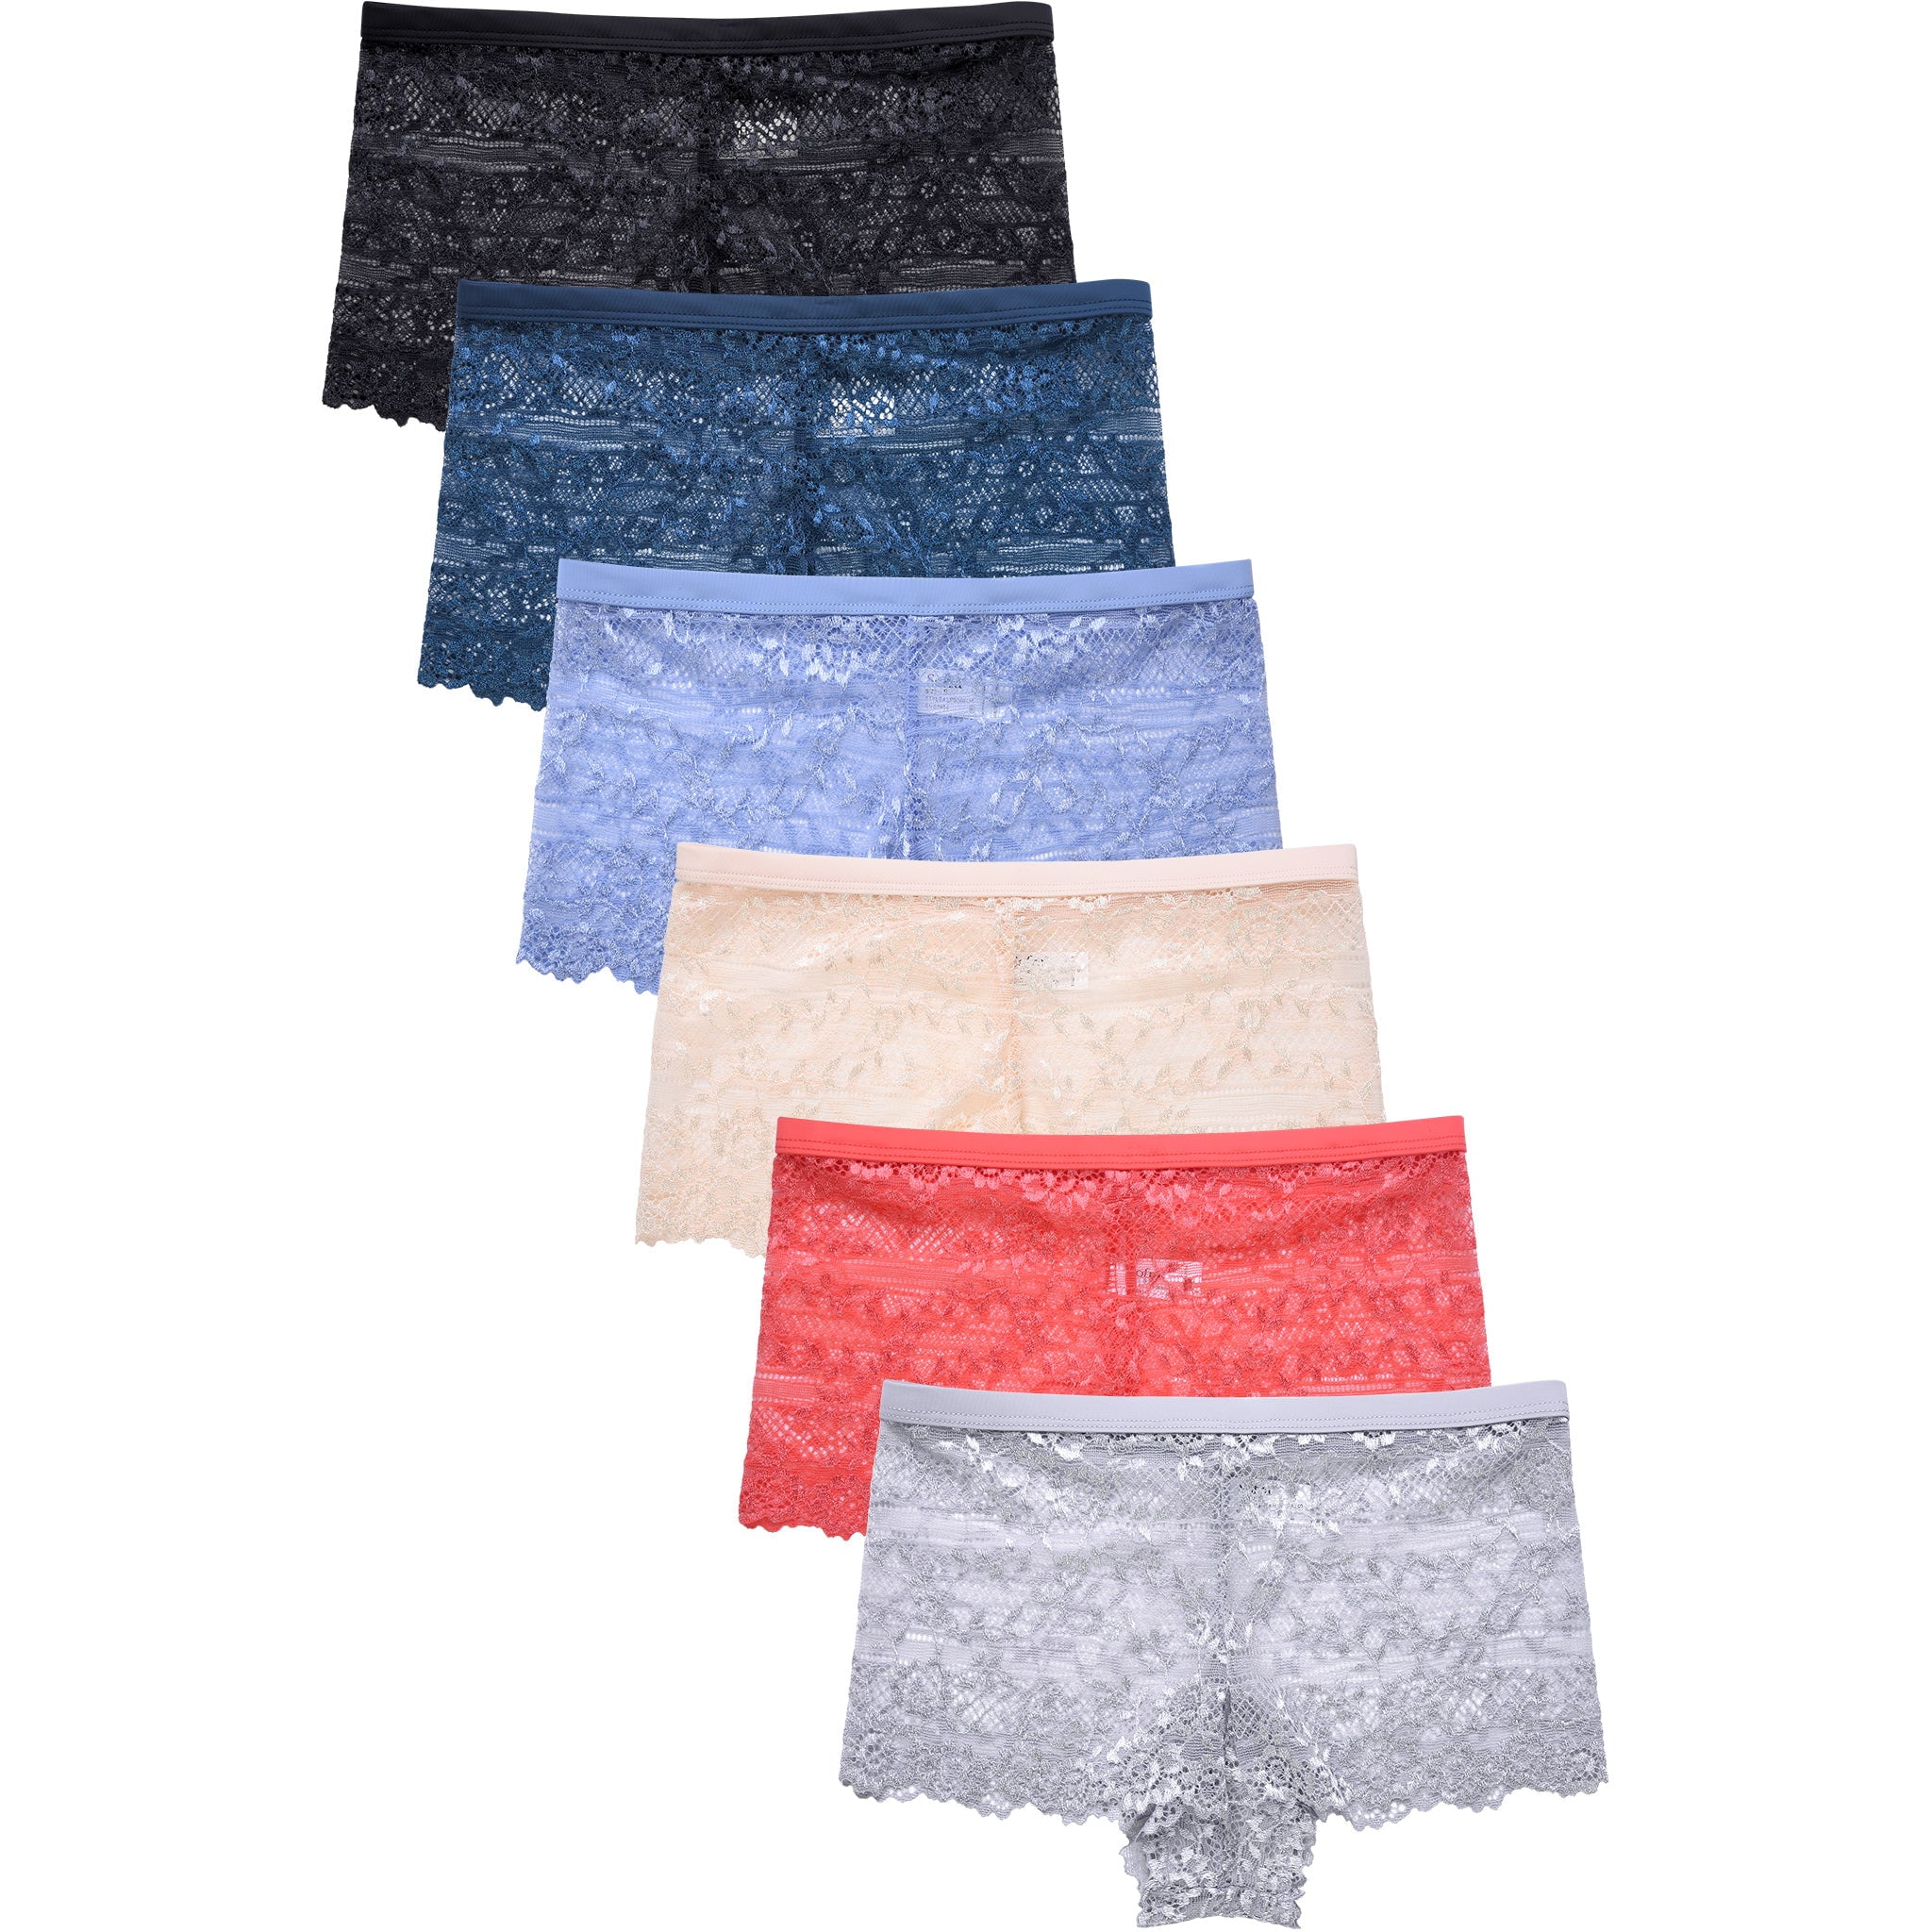 247 Frenzy Women's Essentials PACK OF 6 Seamless Nylon Stretch Brief Panty  Underwear LP0132SR8 at  Women's Clothing store